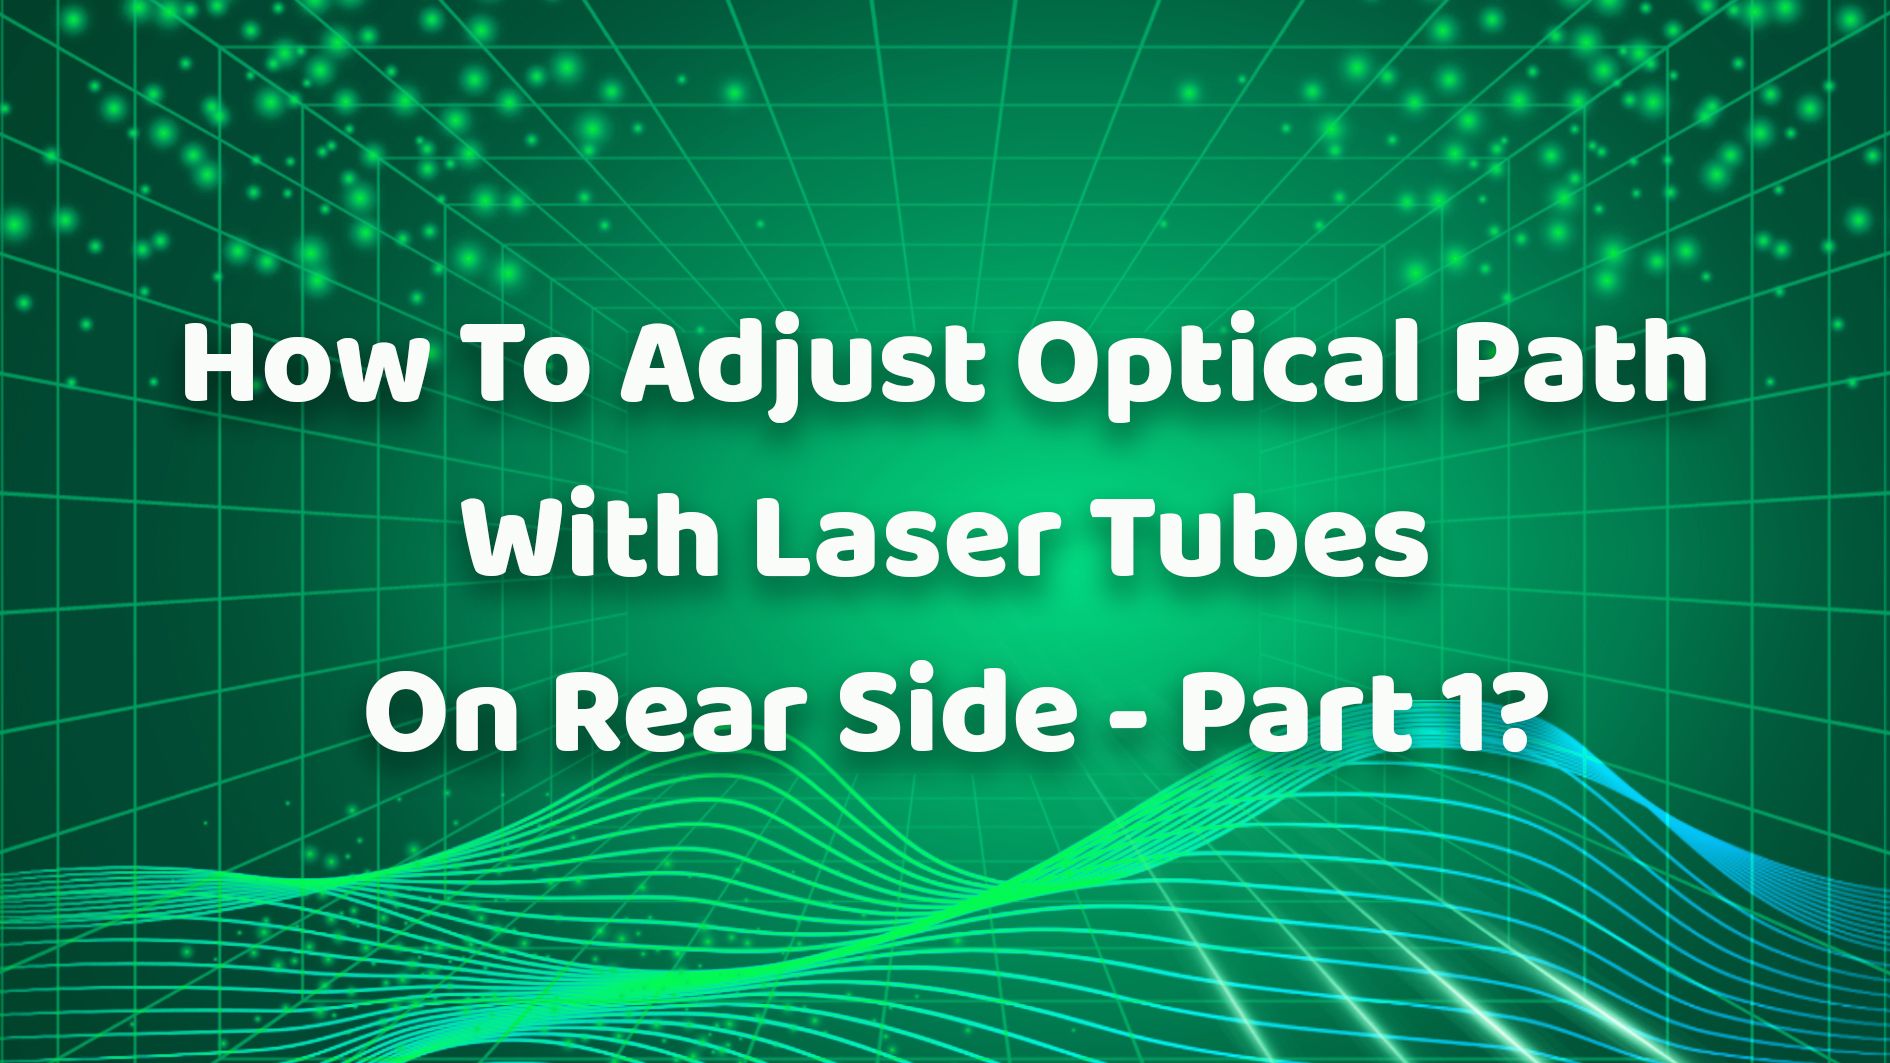 How To Adjust Optical Path With Laser Tubes On Rear Side - Part 1？